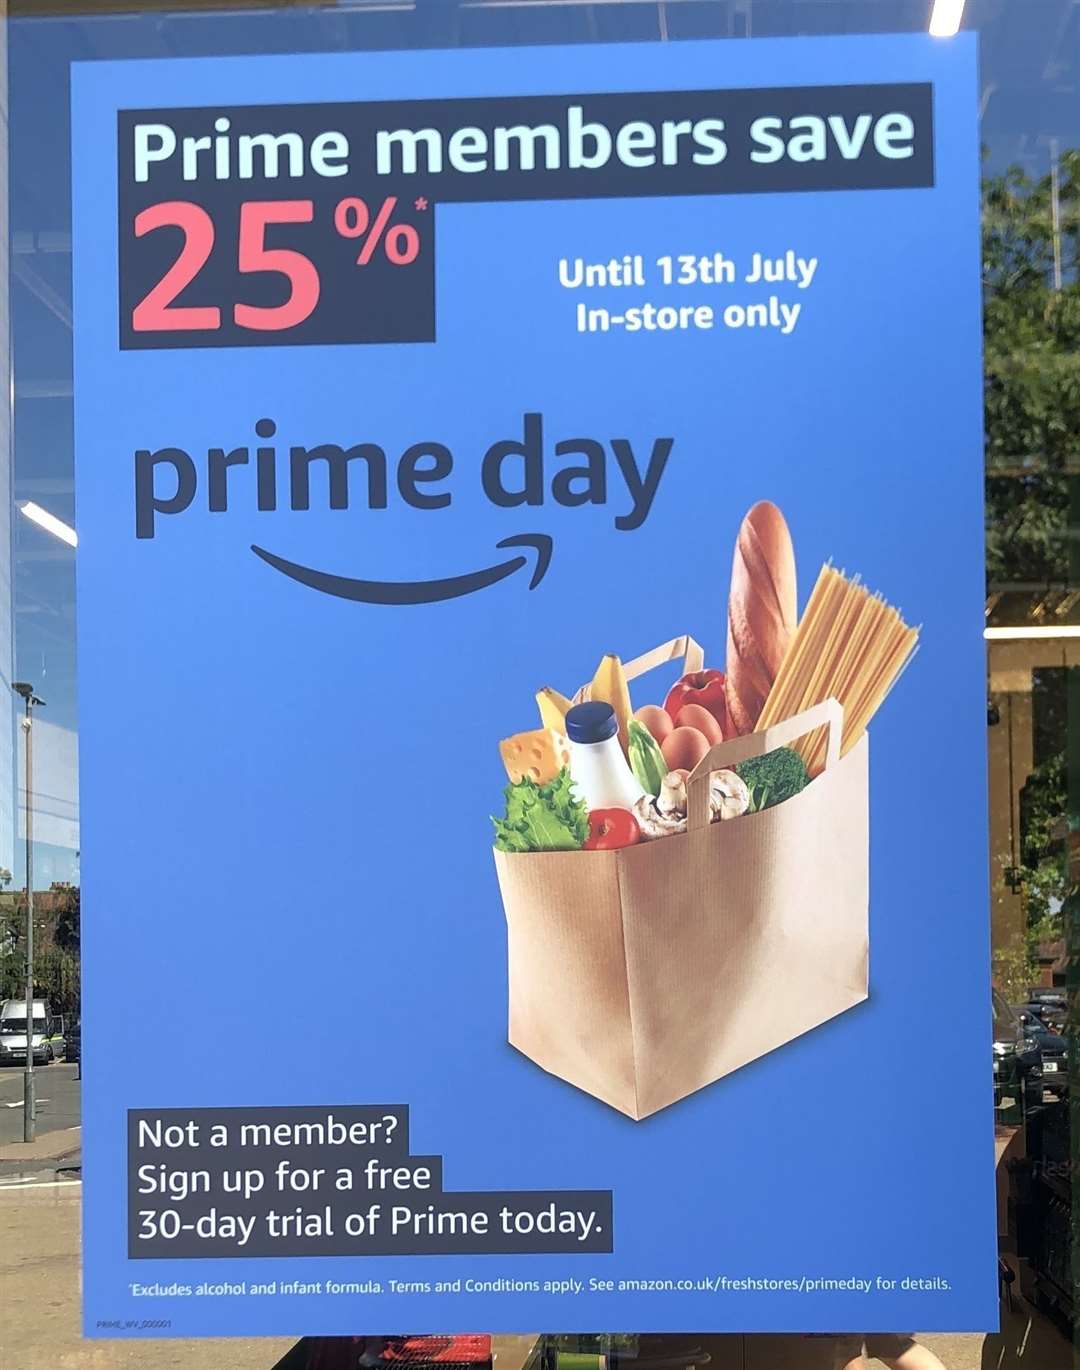 The new Amazon Fresh store is the second in the UK